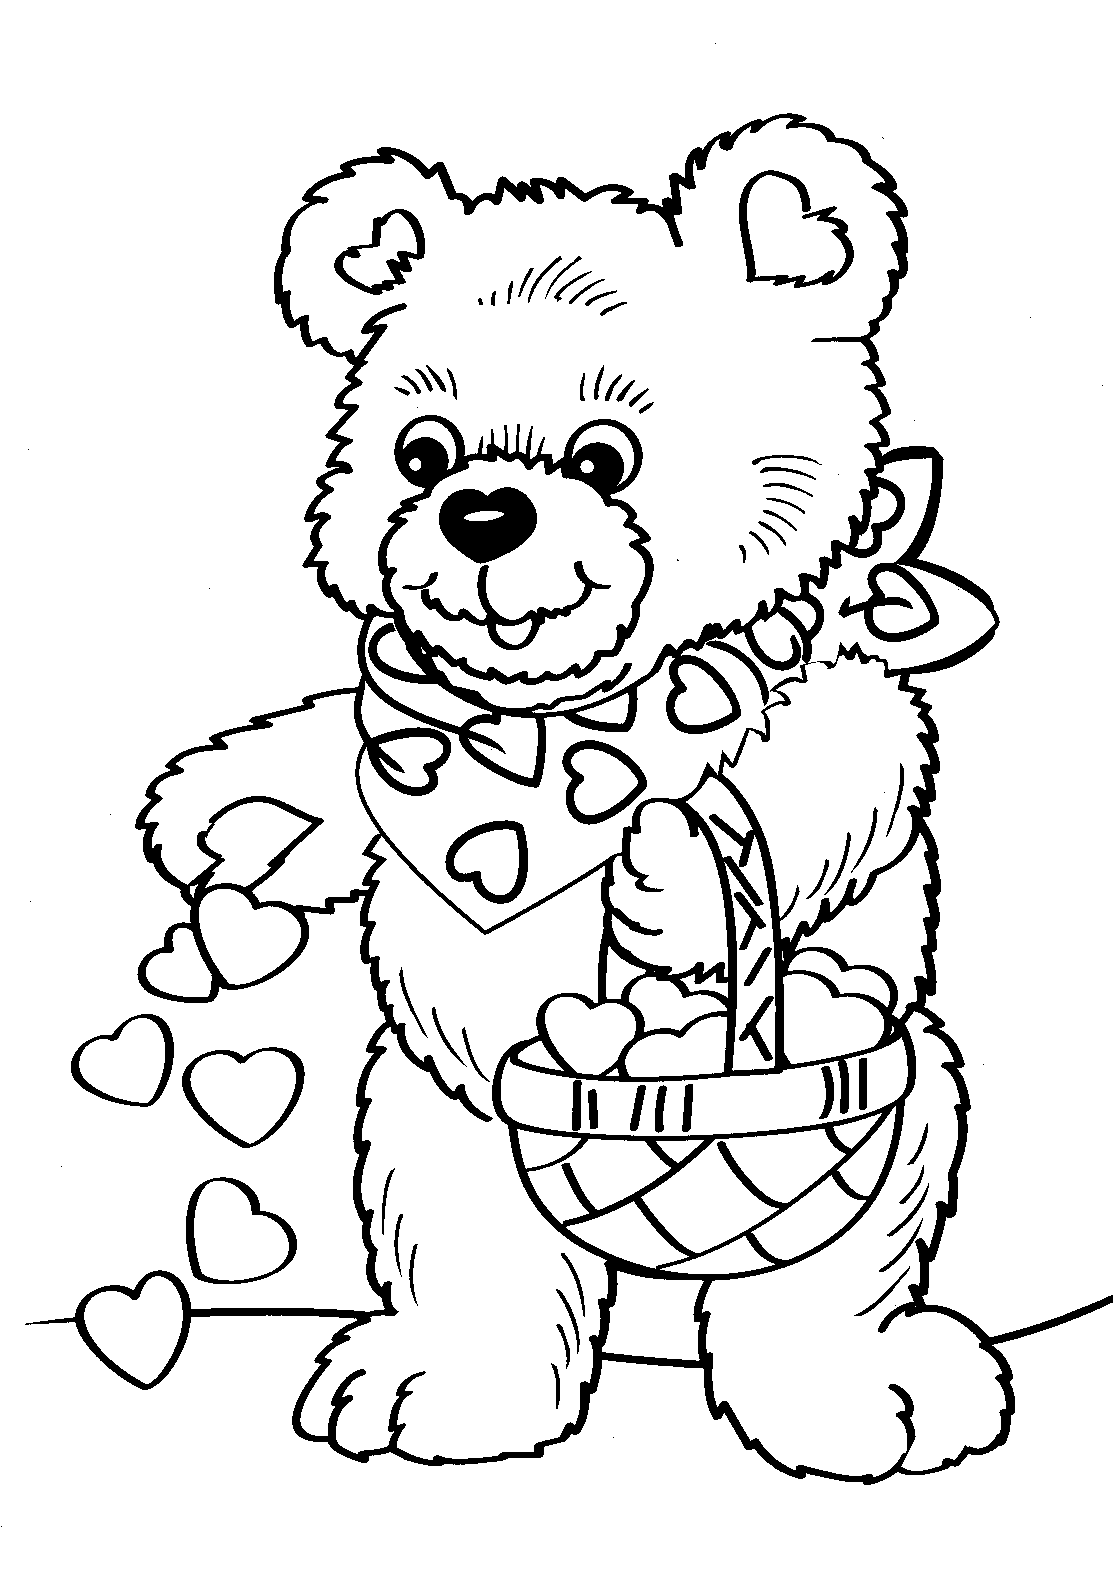 Bear Heart Coloring Pages Cute Bear with Hearts Printable 2021 0867 Coloring4free